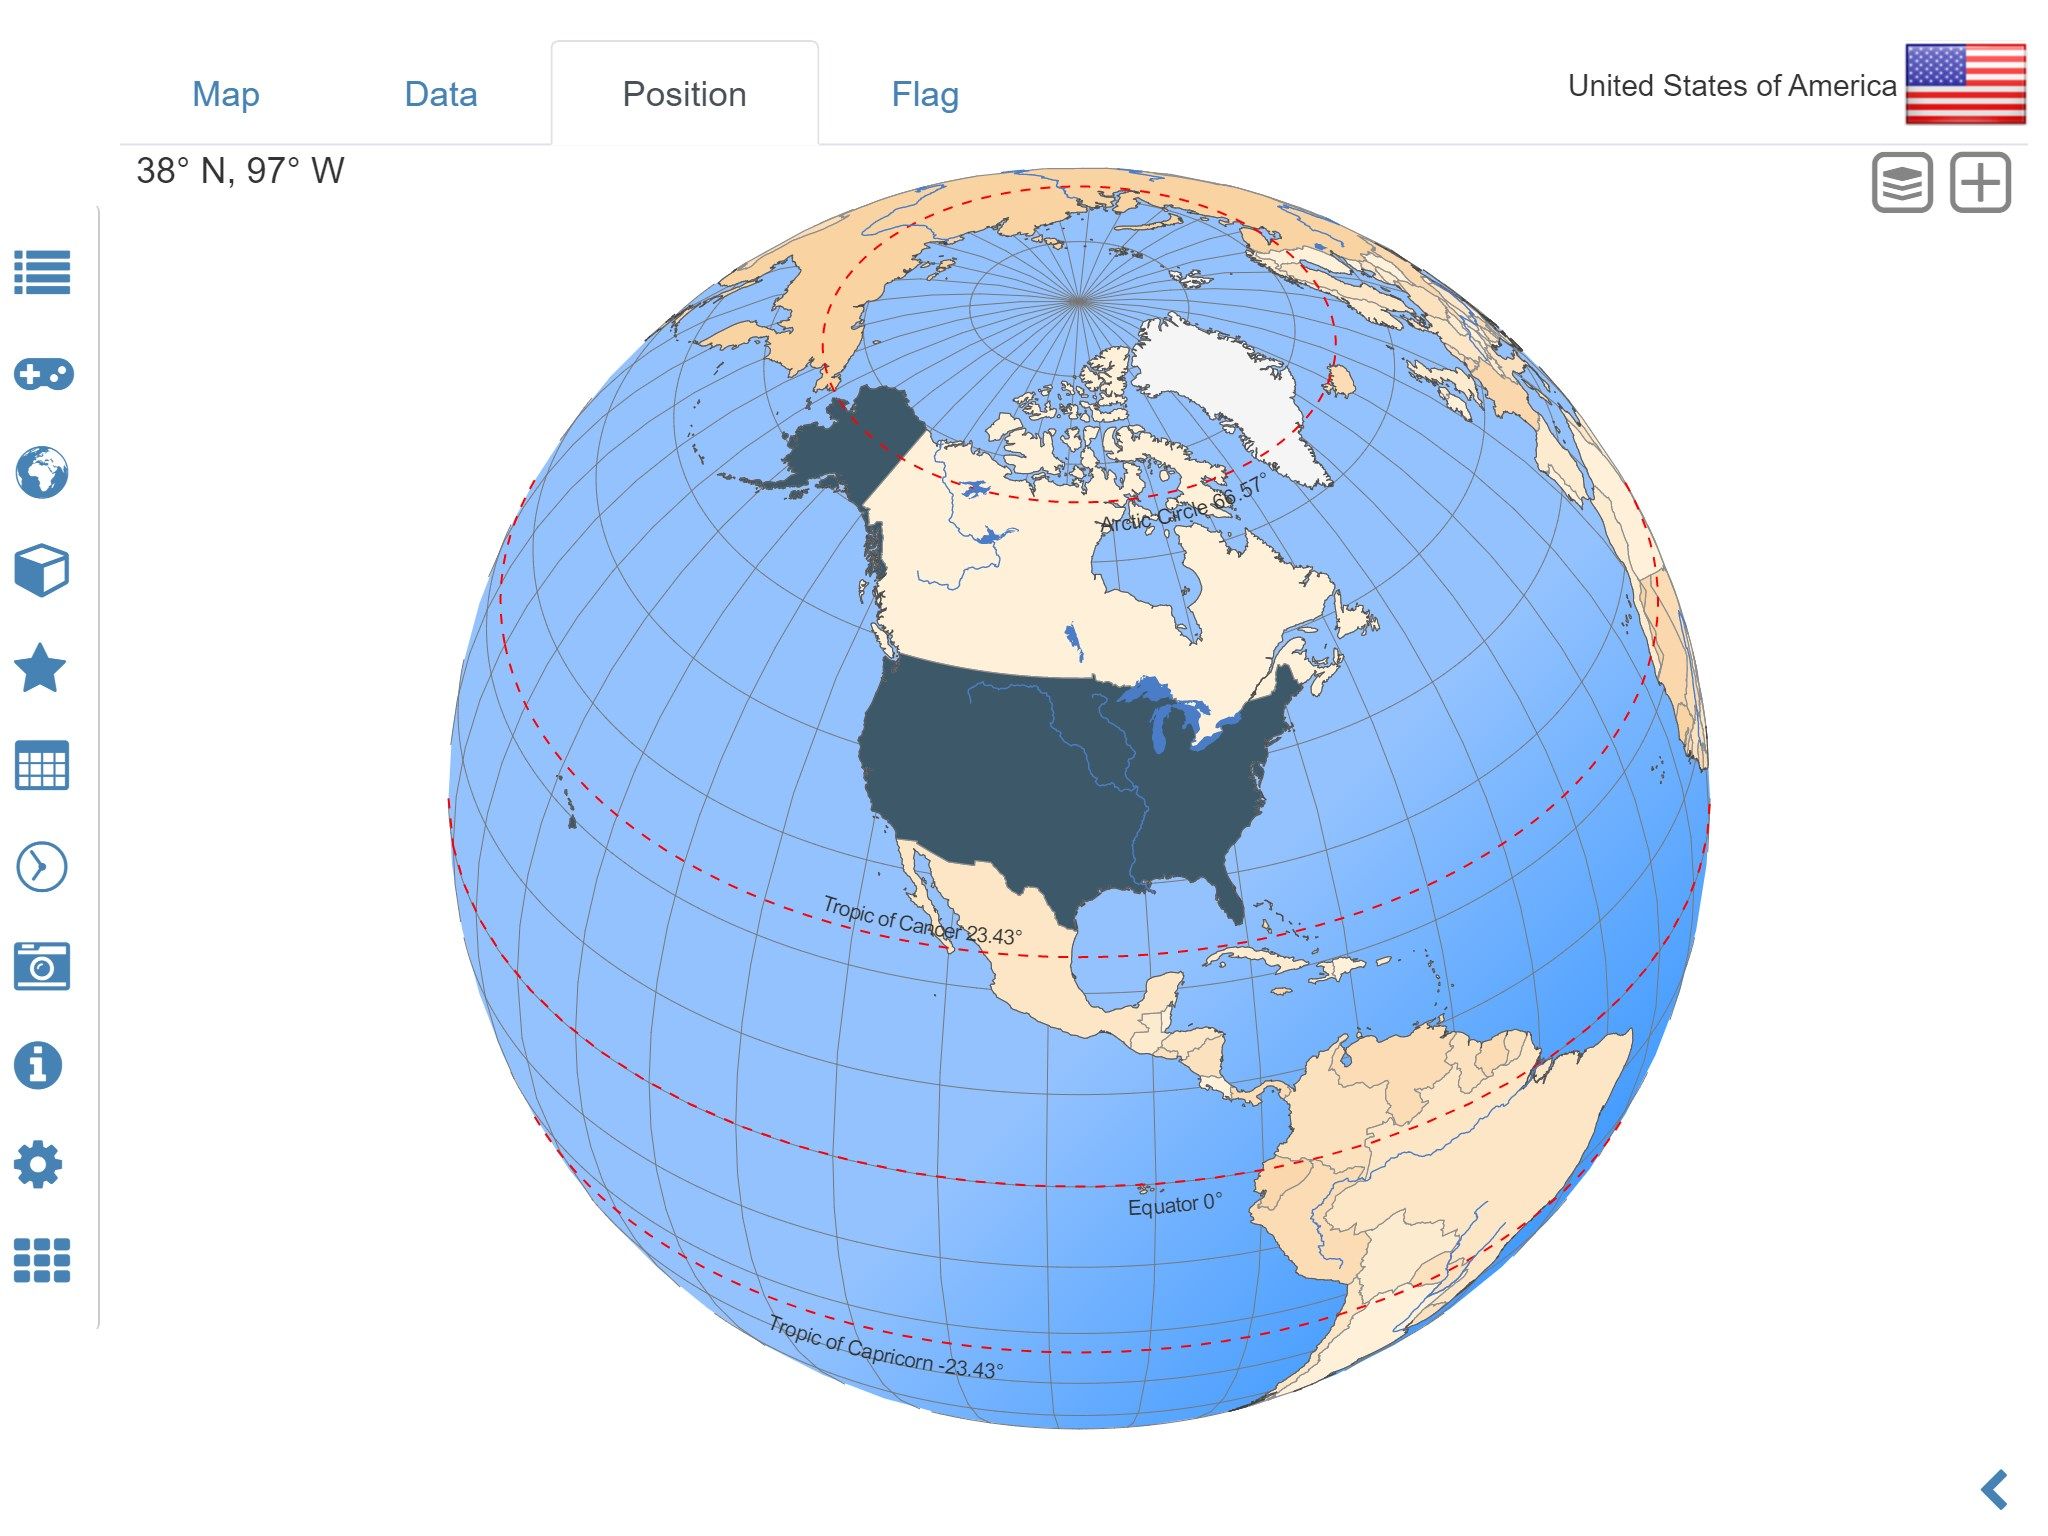 Learn where each country in the world is located. View its position highlighted on a digital globe.